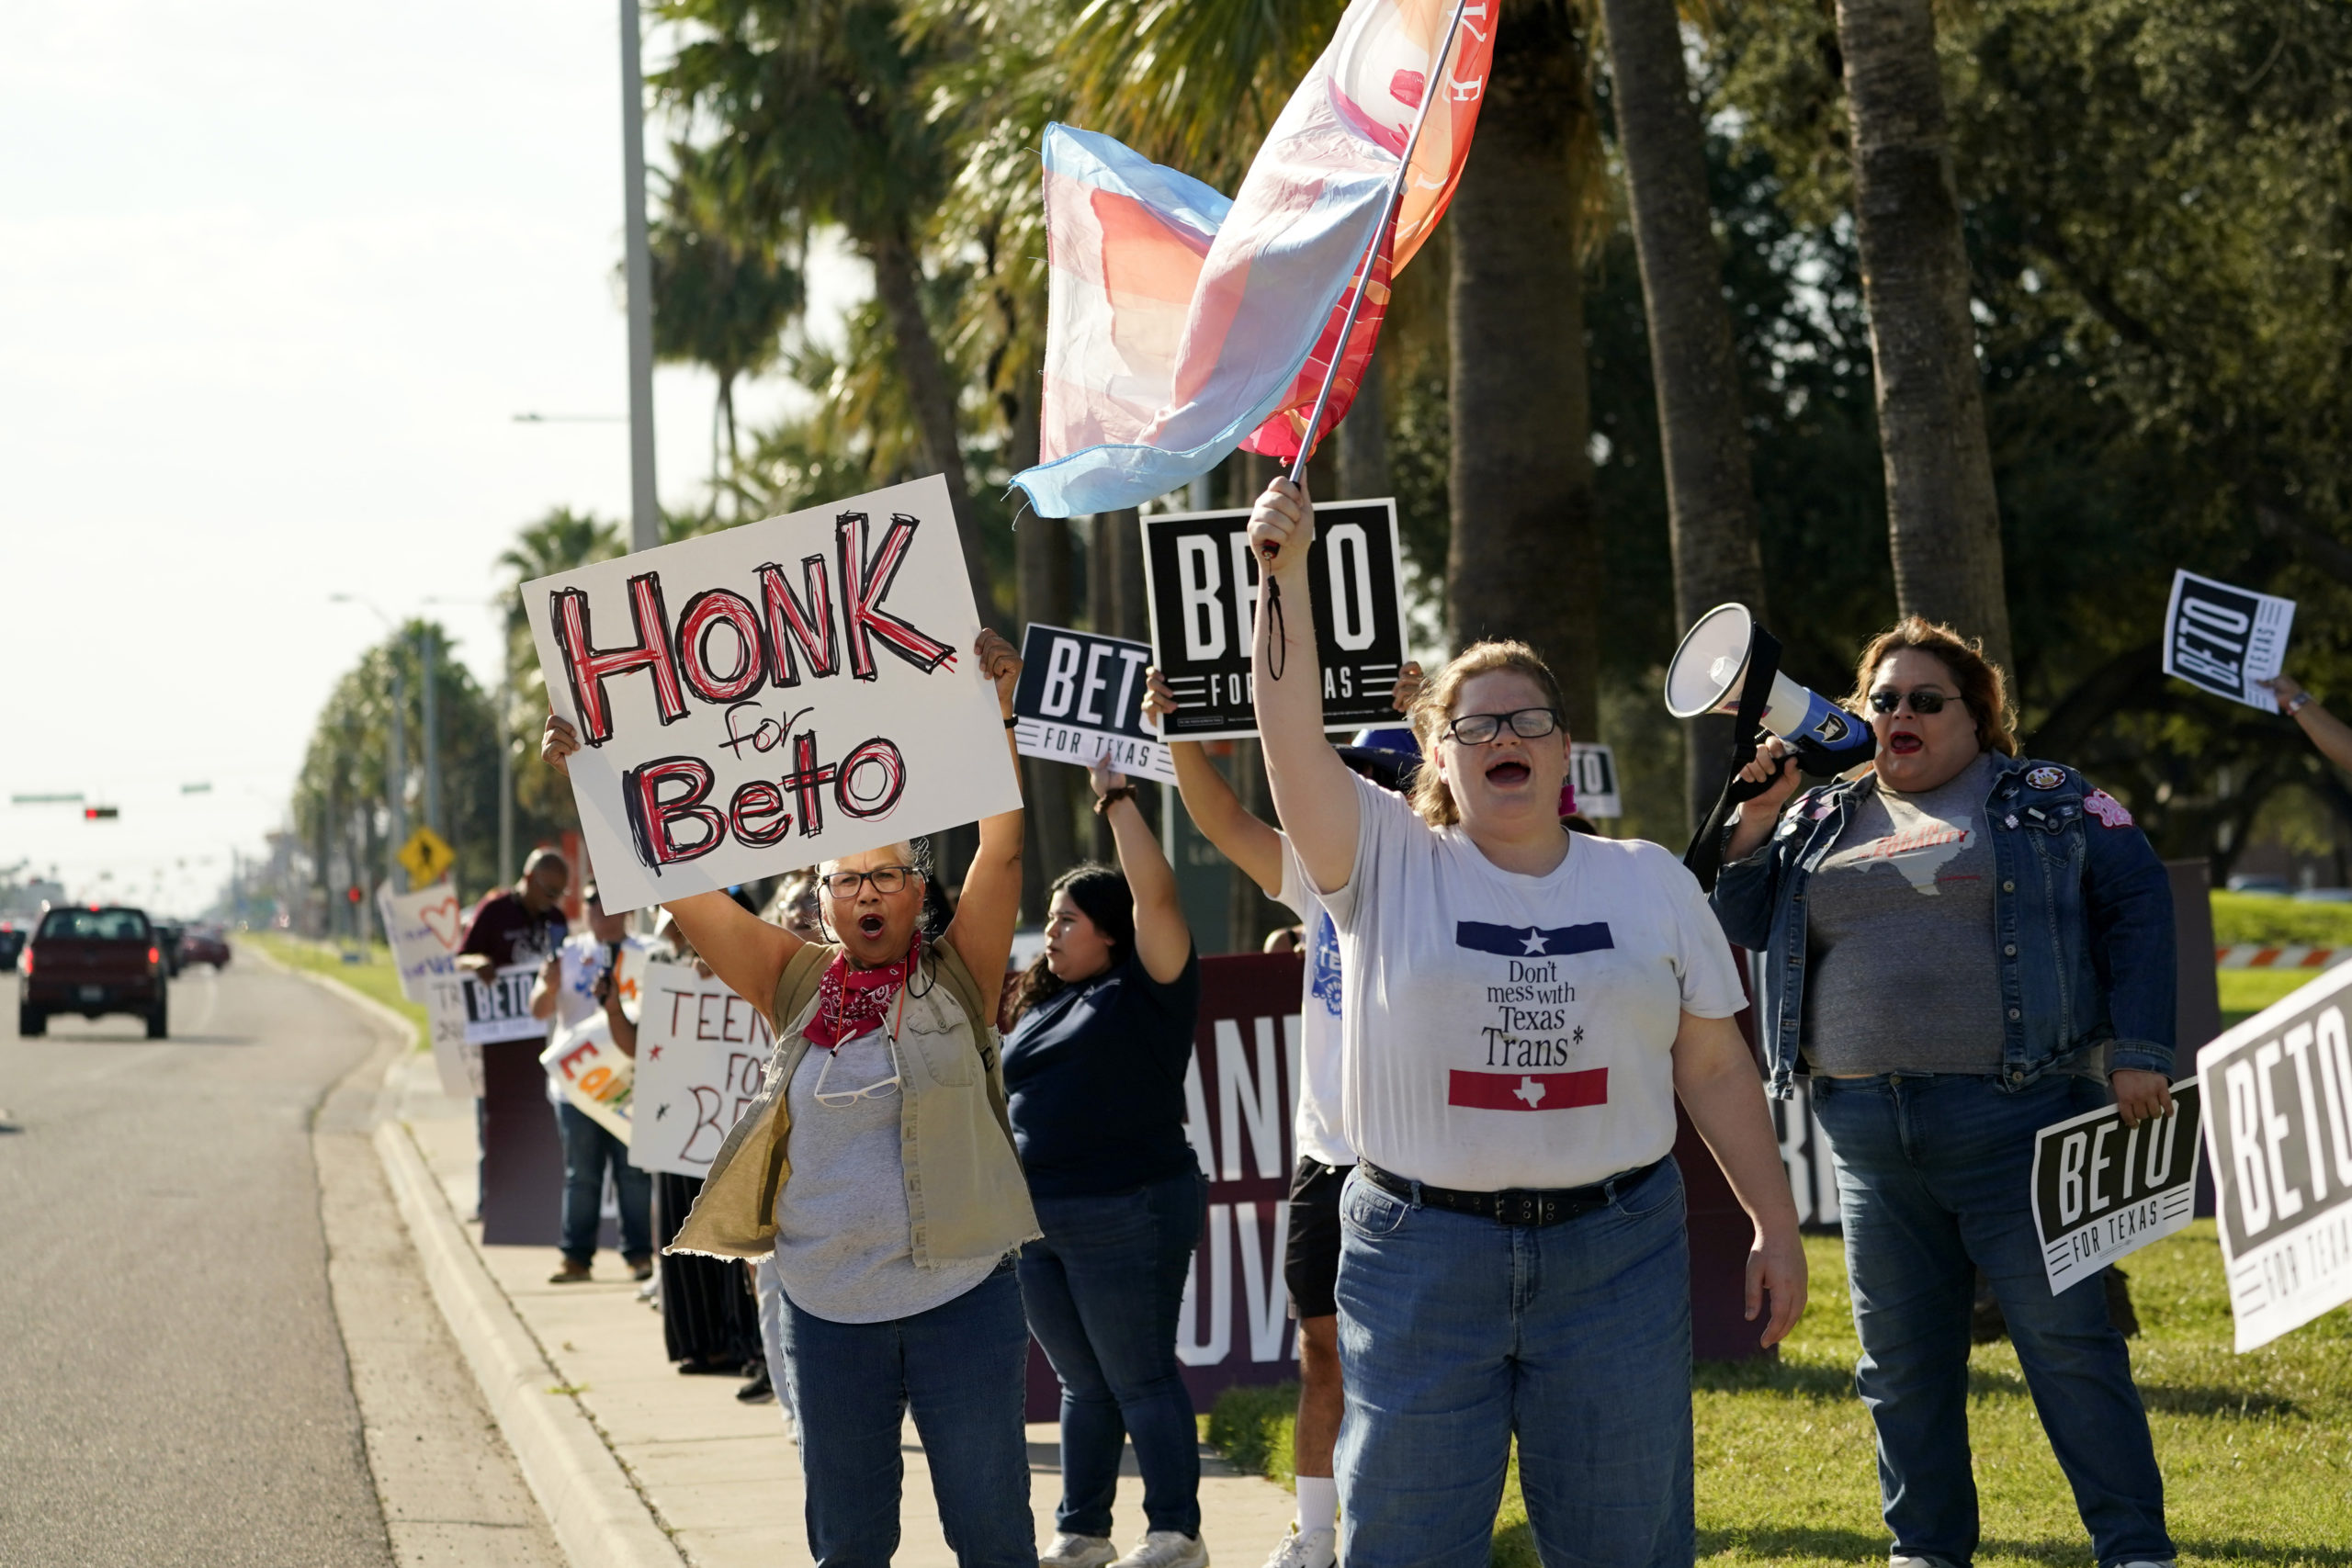 Beto supporters wave signs, flags and hold a banner by the side of a road, while another uses a bullhorn.